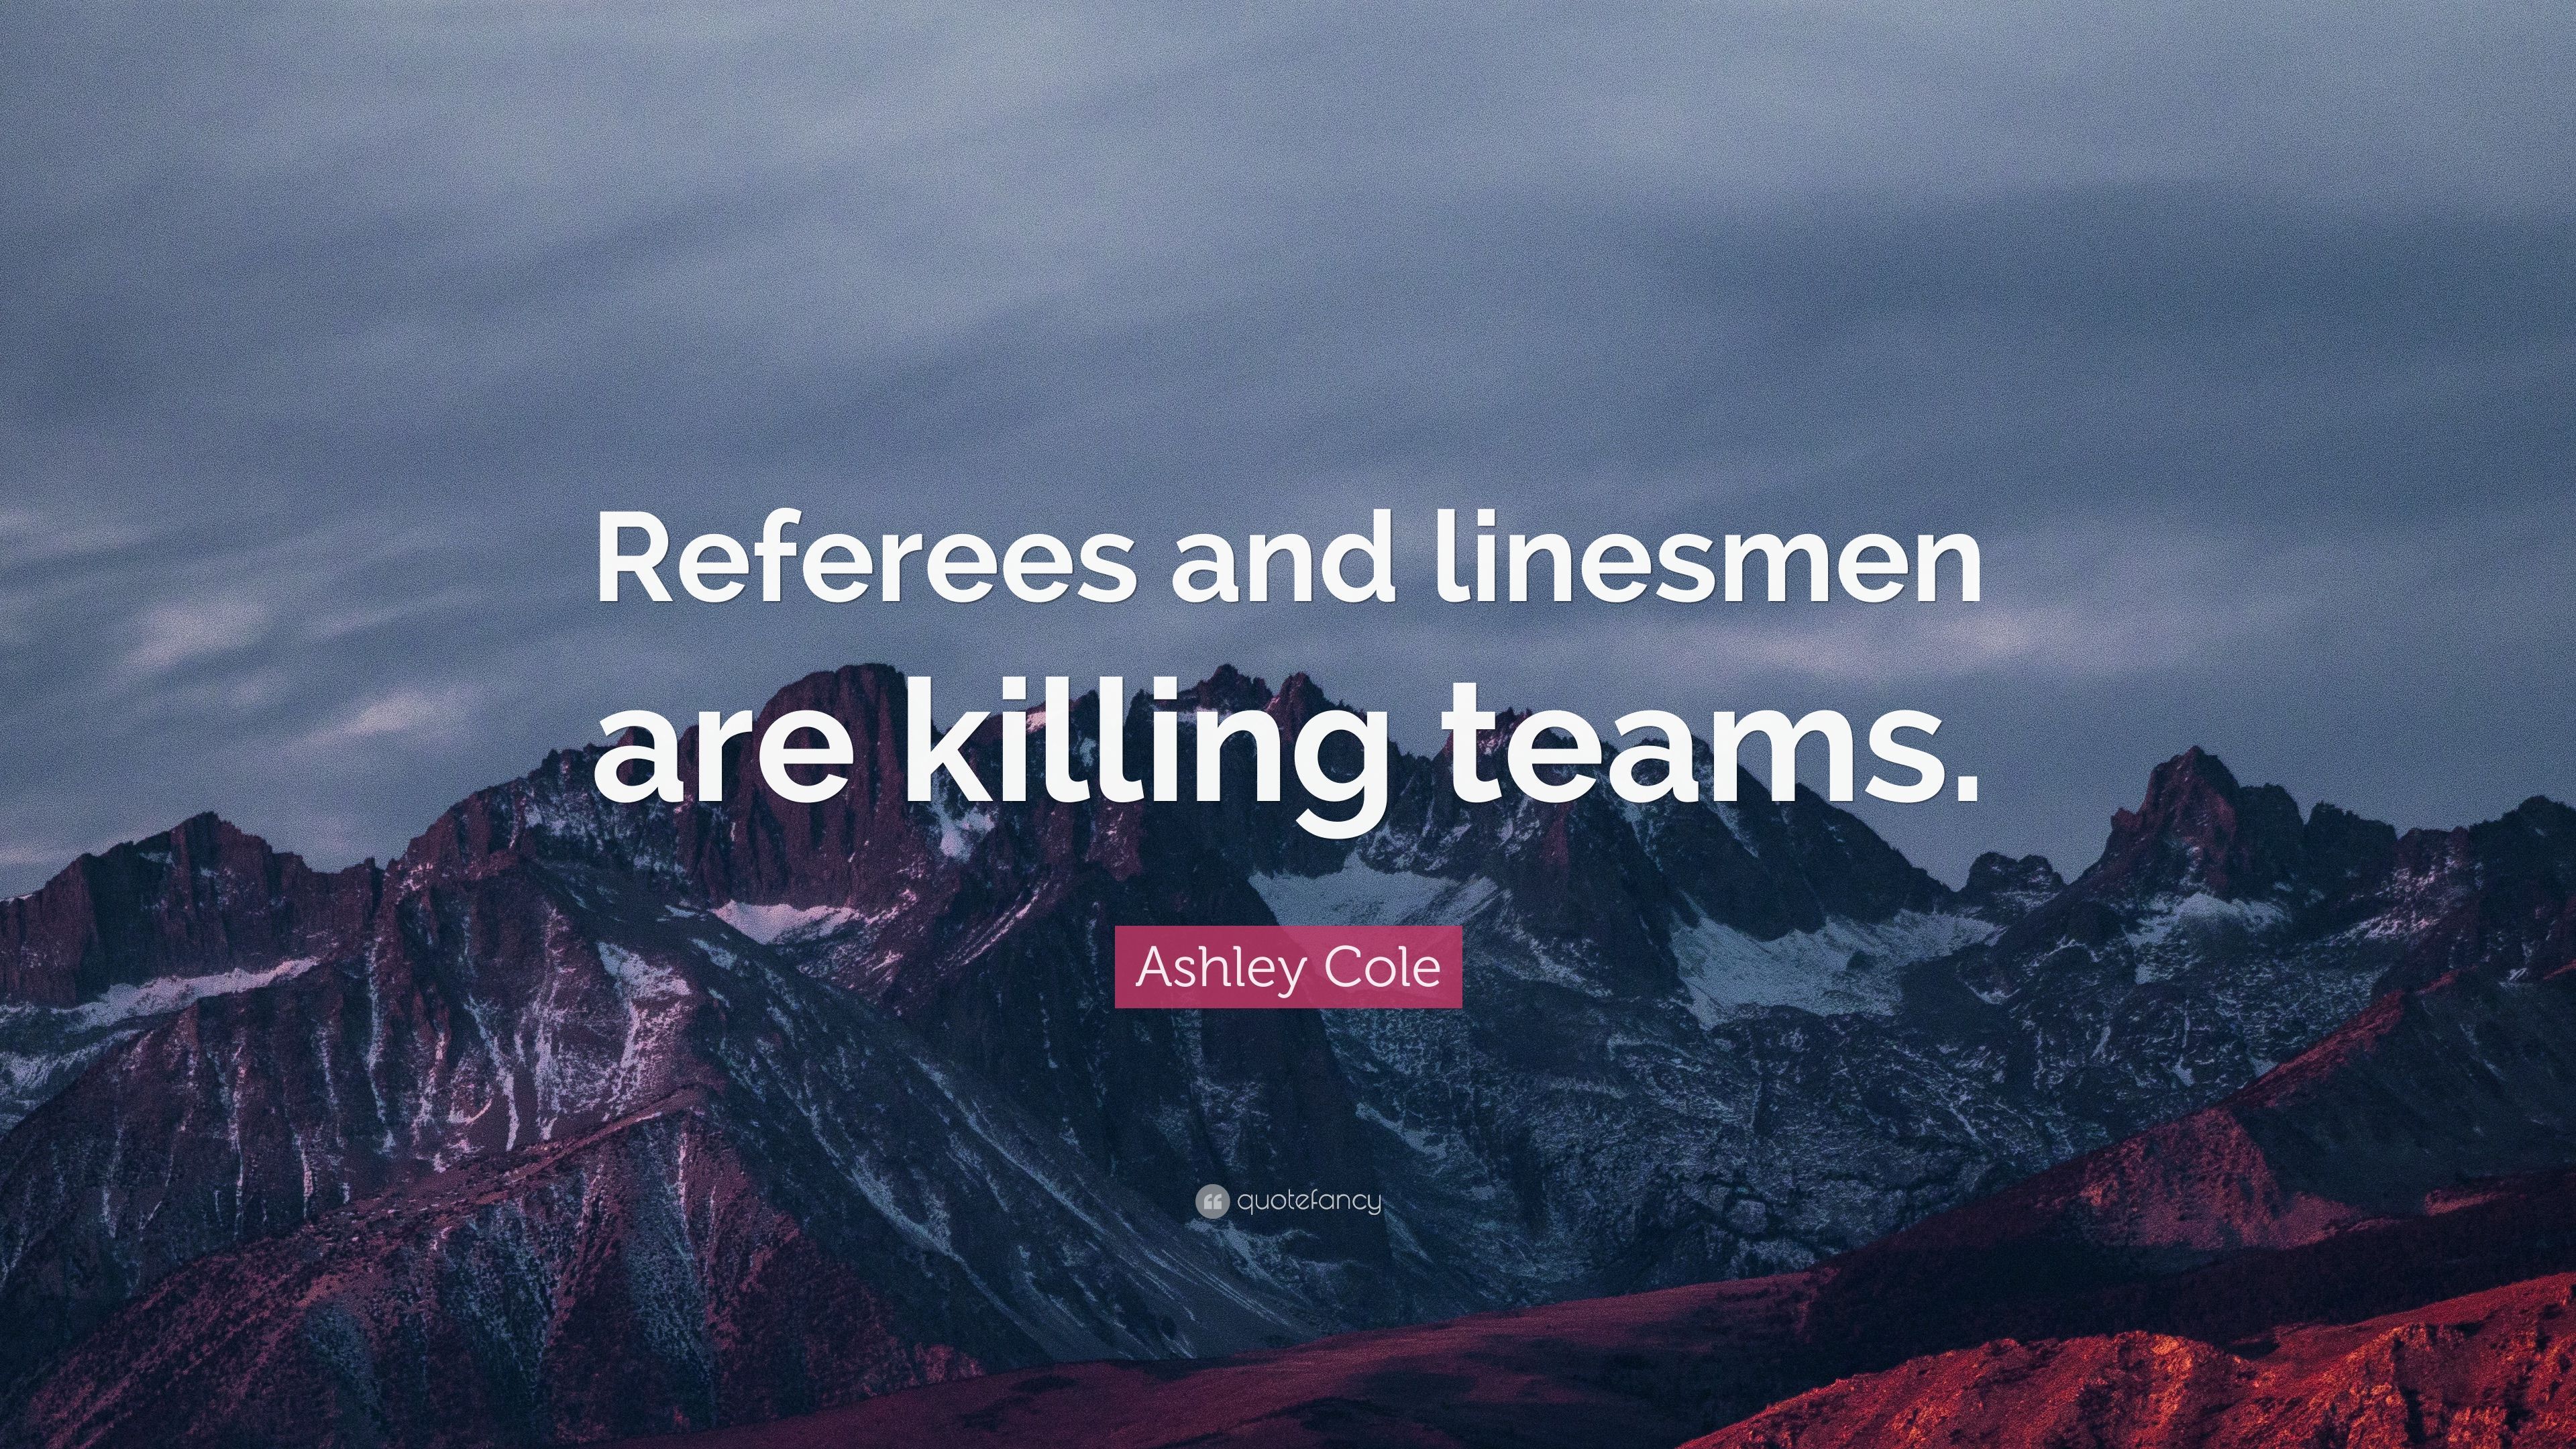 Ashley Cole Quotes (5 wallpaper)